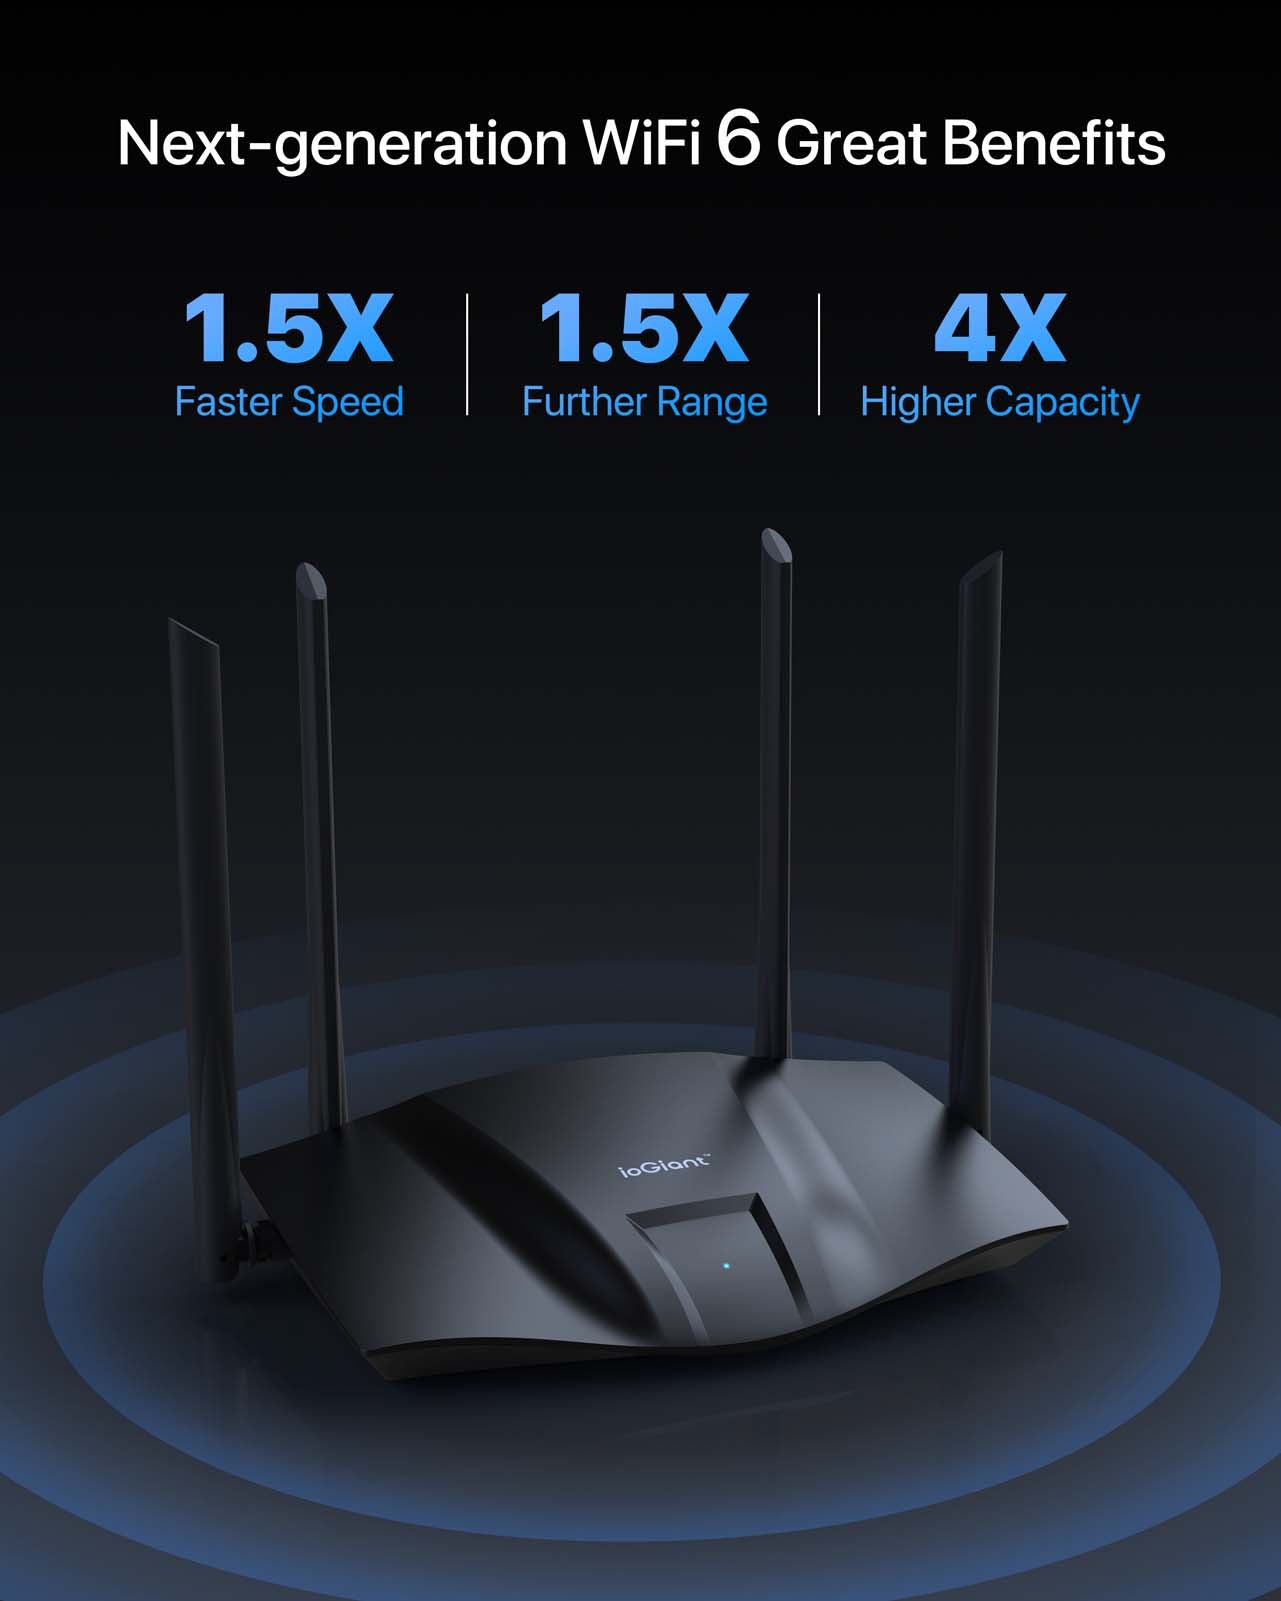 ioGiant next-generation wifi 6 router brings 1.5 times faster speed, 1.5 times further range and 4 times higher capacity.